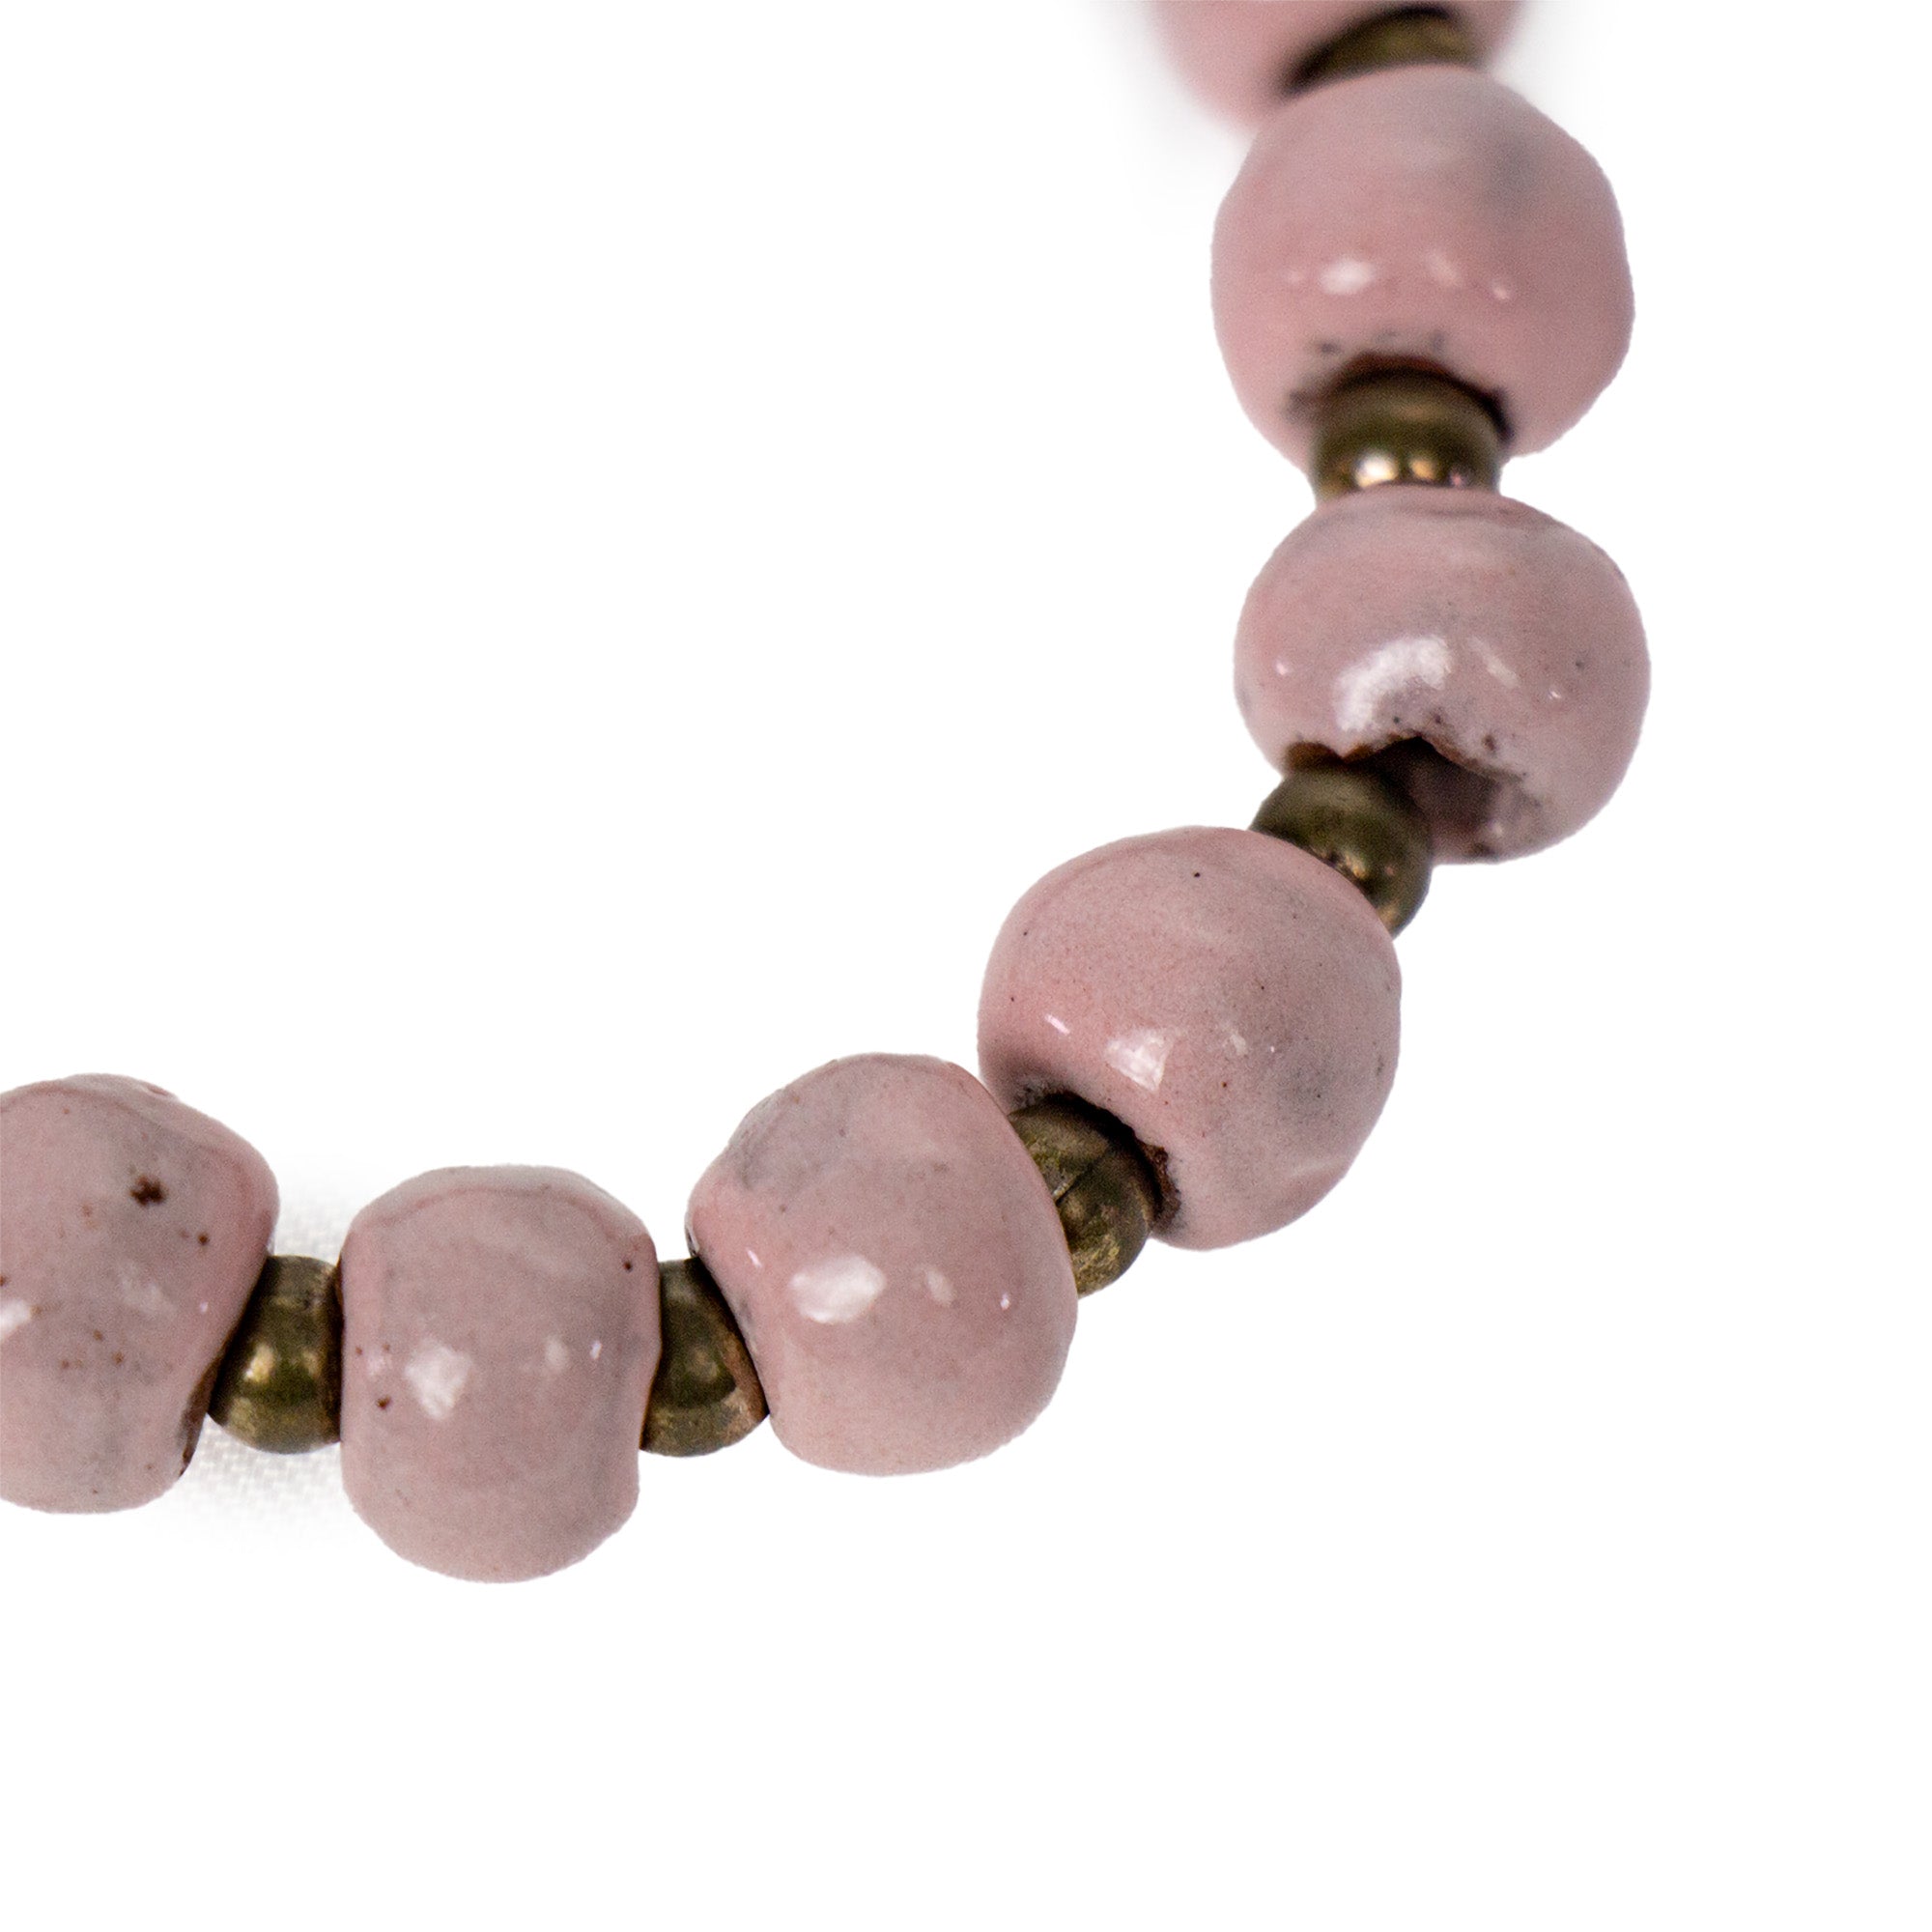 Pastel Solid Bead Pack